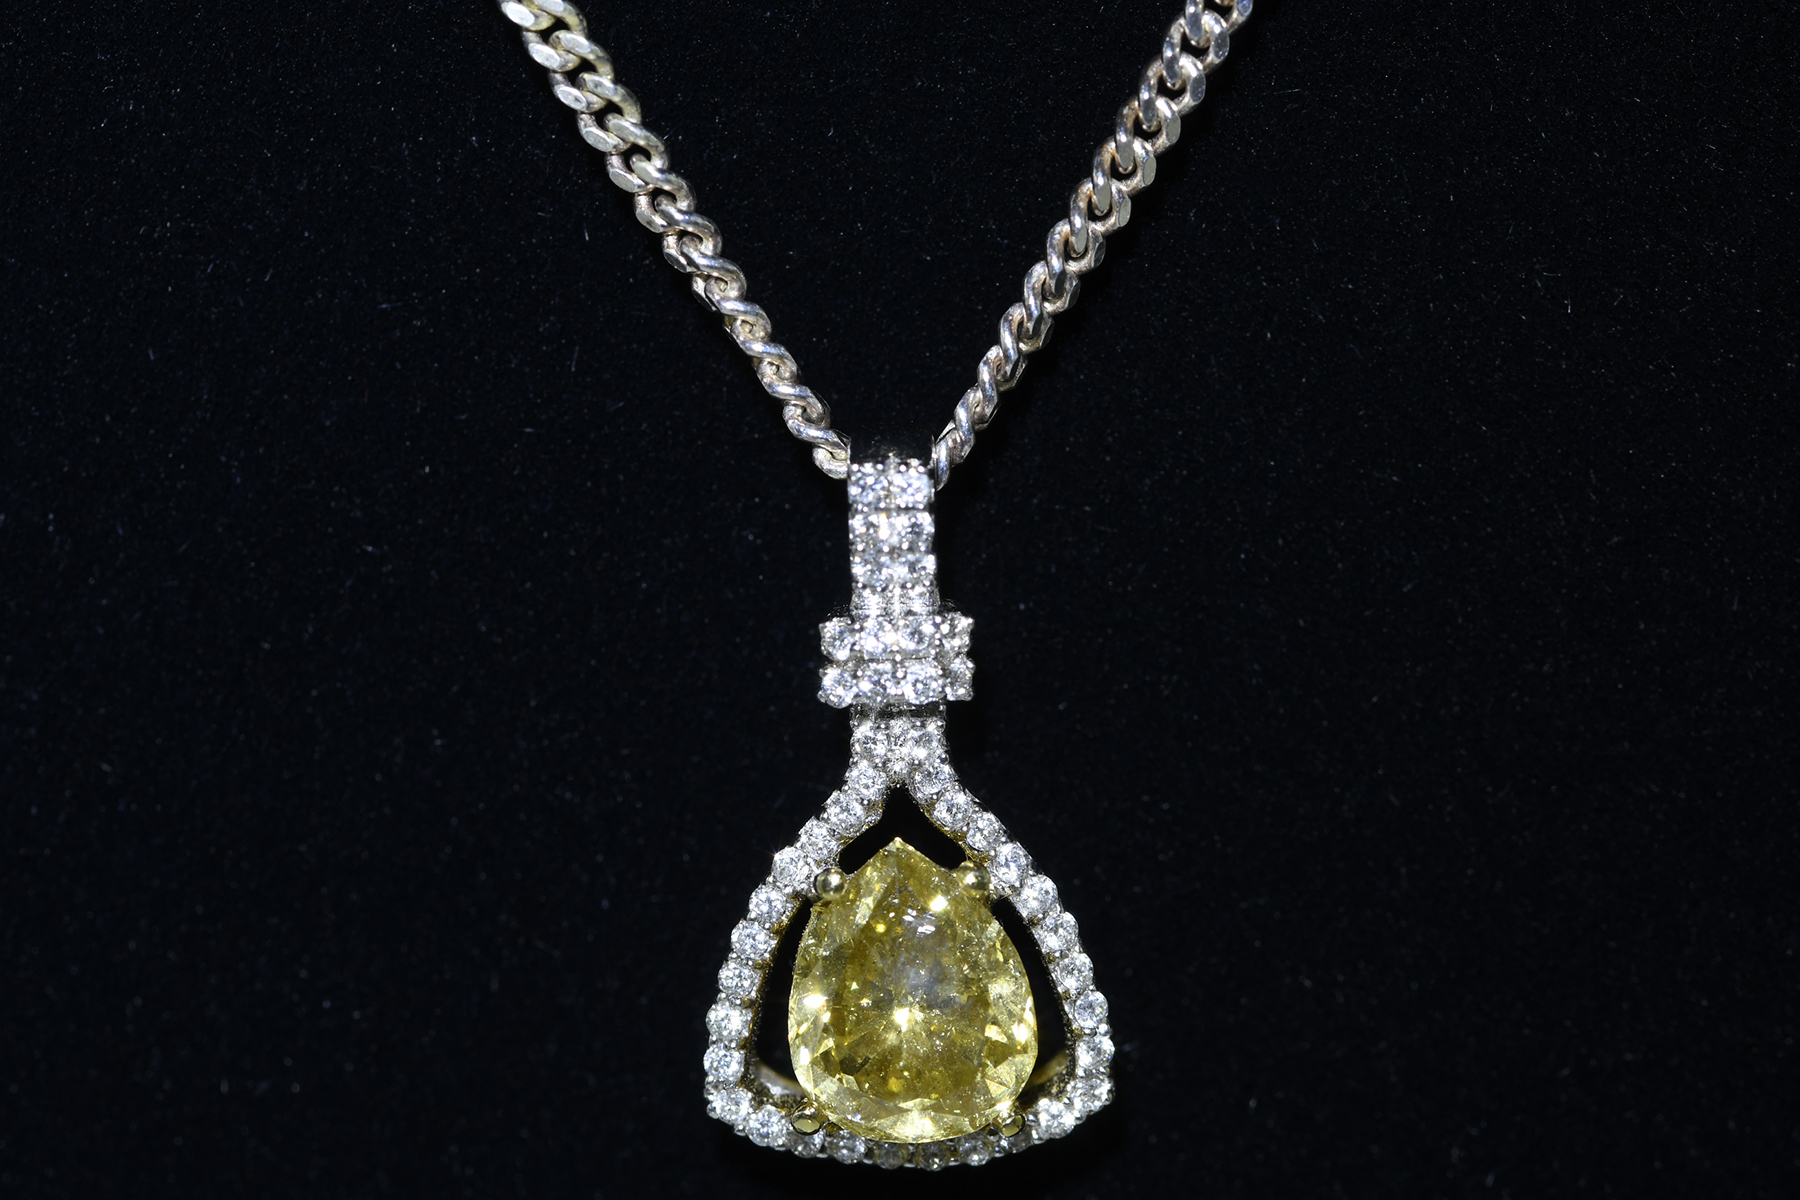 Diamond Pendant with 1.46 Carat Pear Shaped Solitaire Coloured Diamond - Image 2 of 2